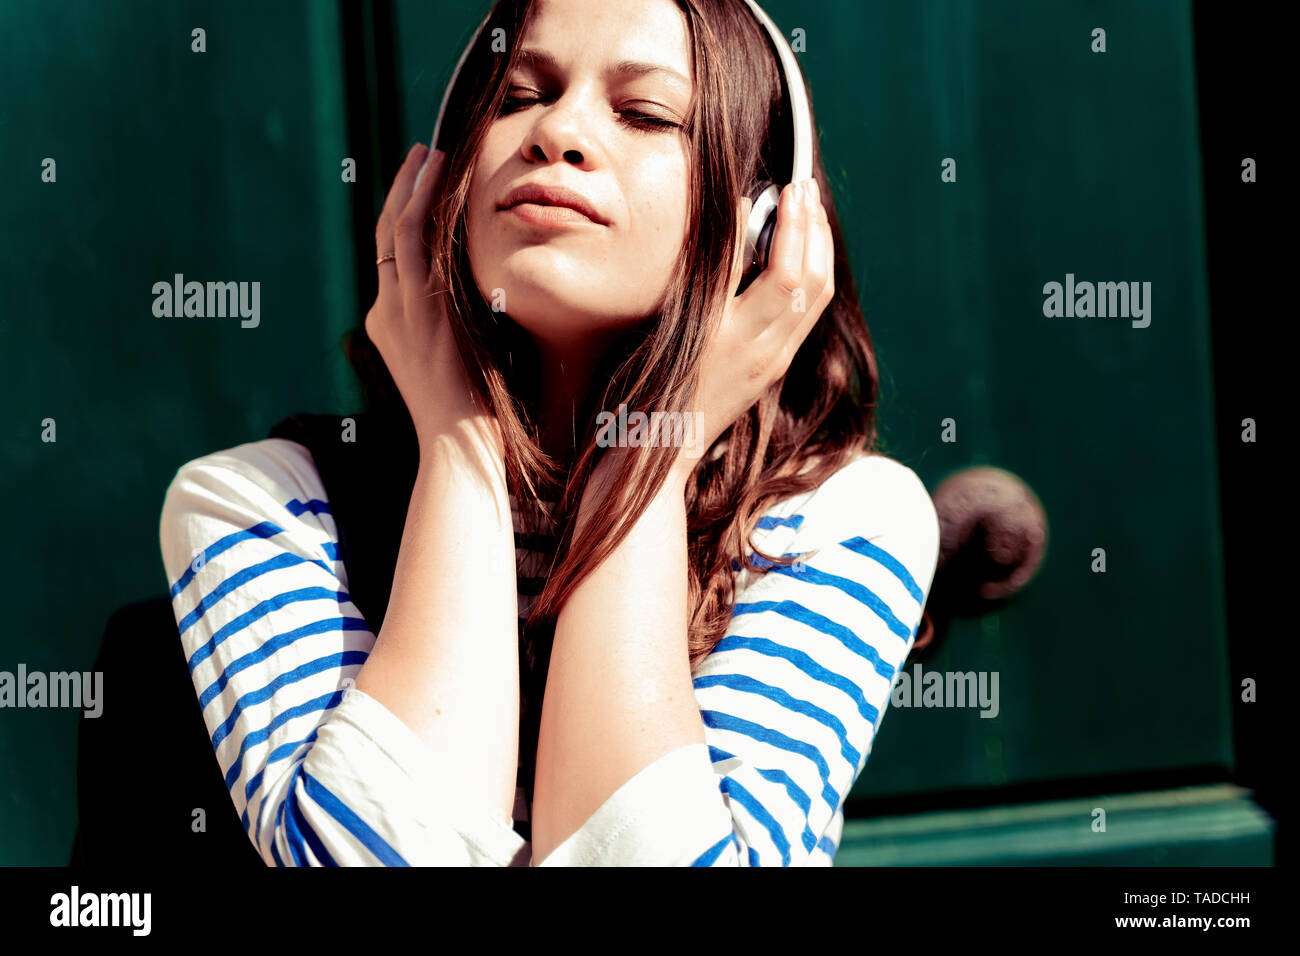 Young woman listening music with eyes closed Stock Photo